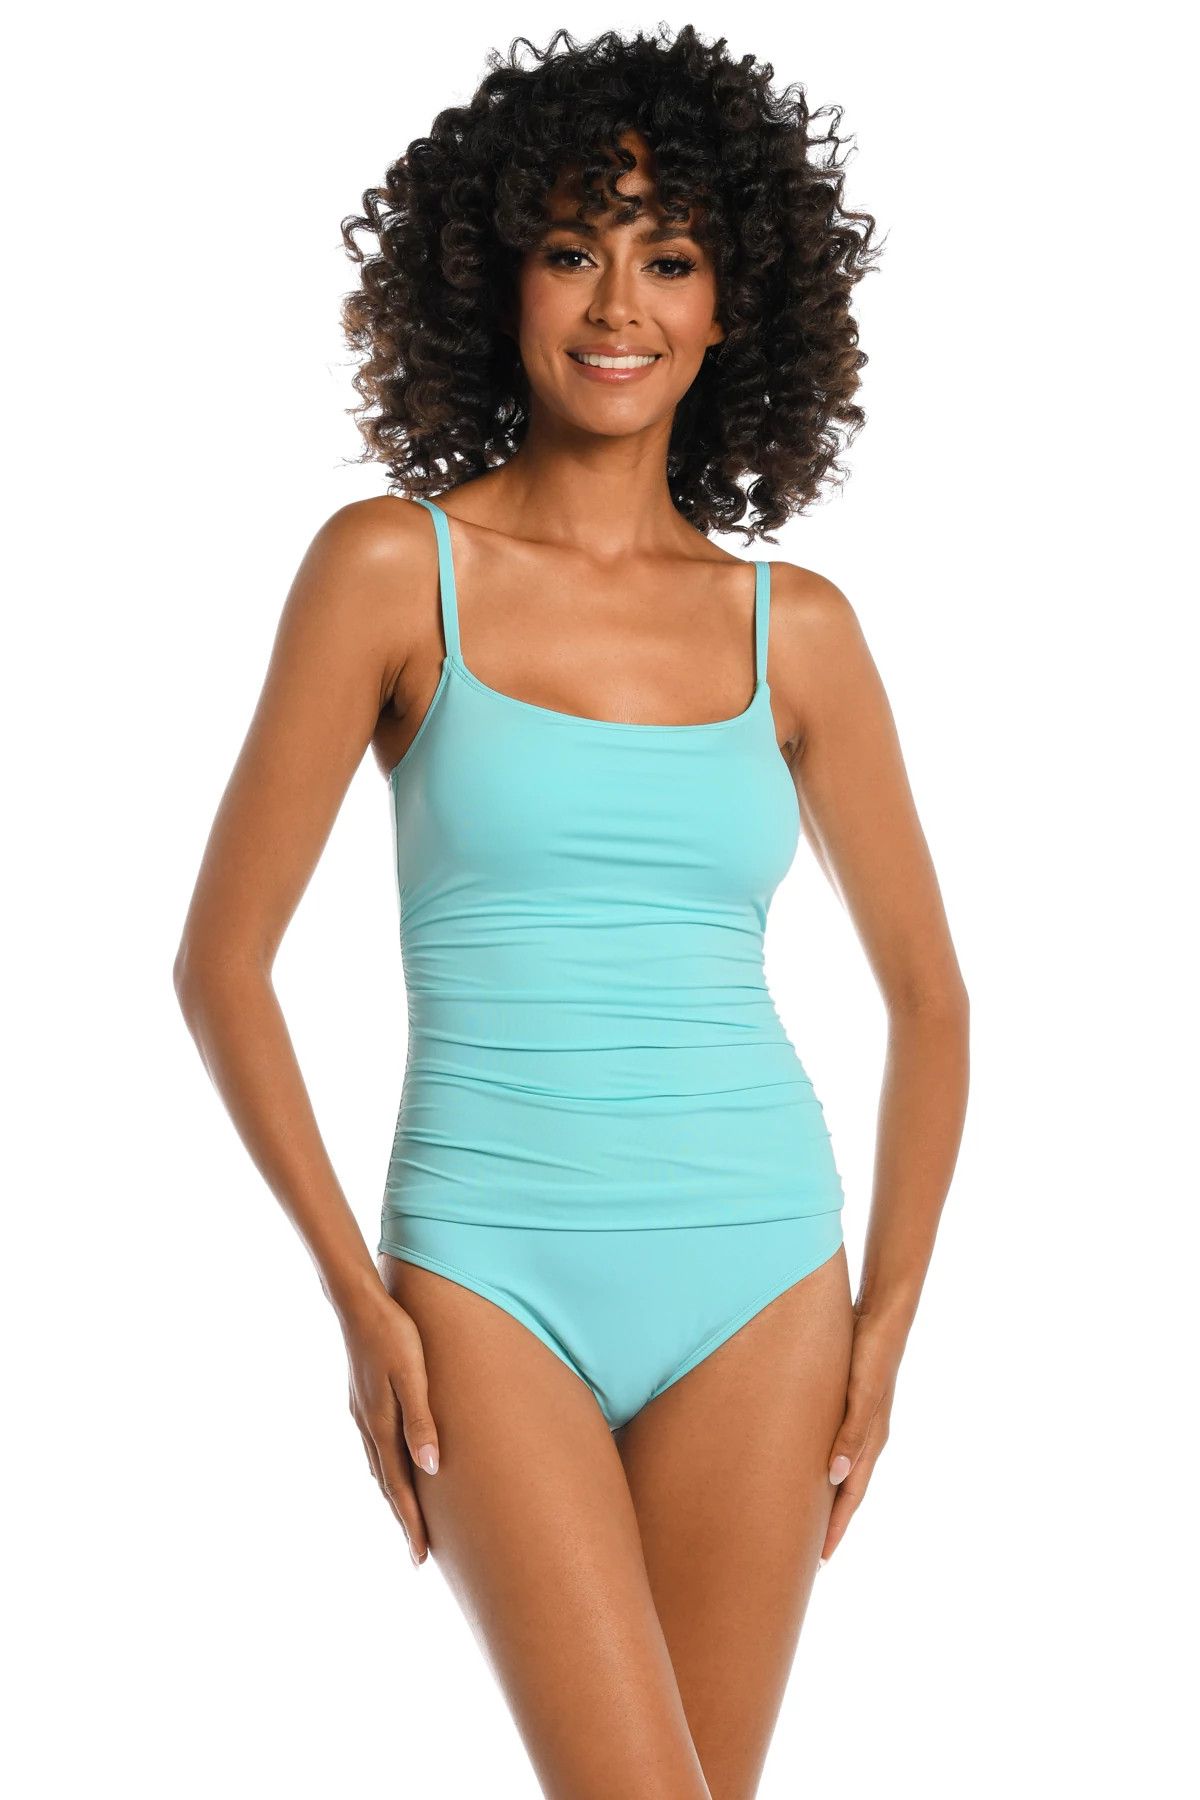 Island Goddess Lingerie One Piece Swimsuit | Everything But Water